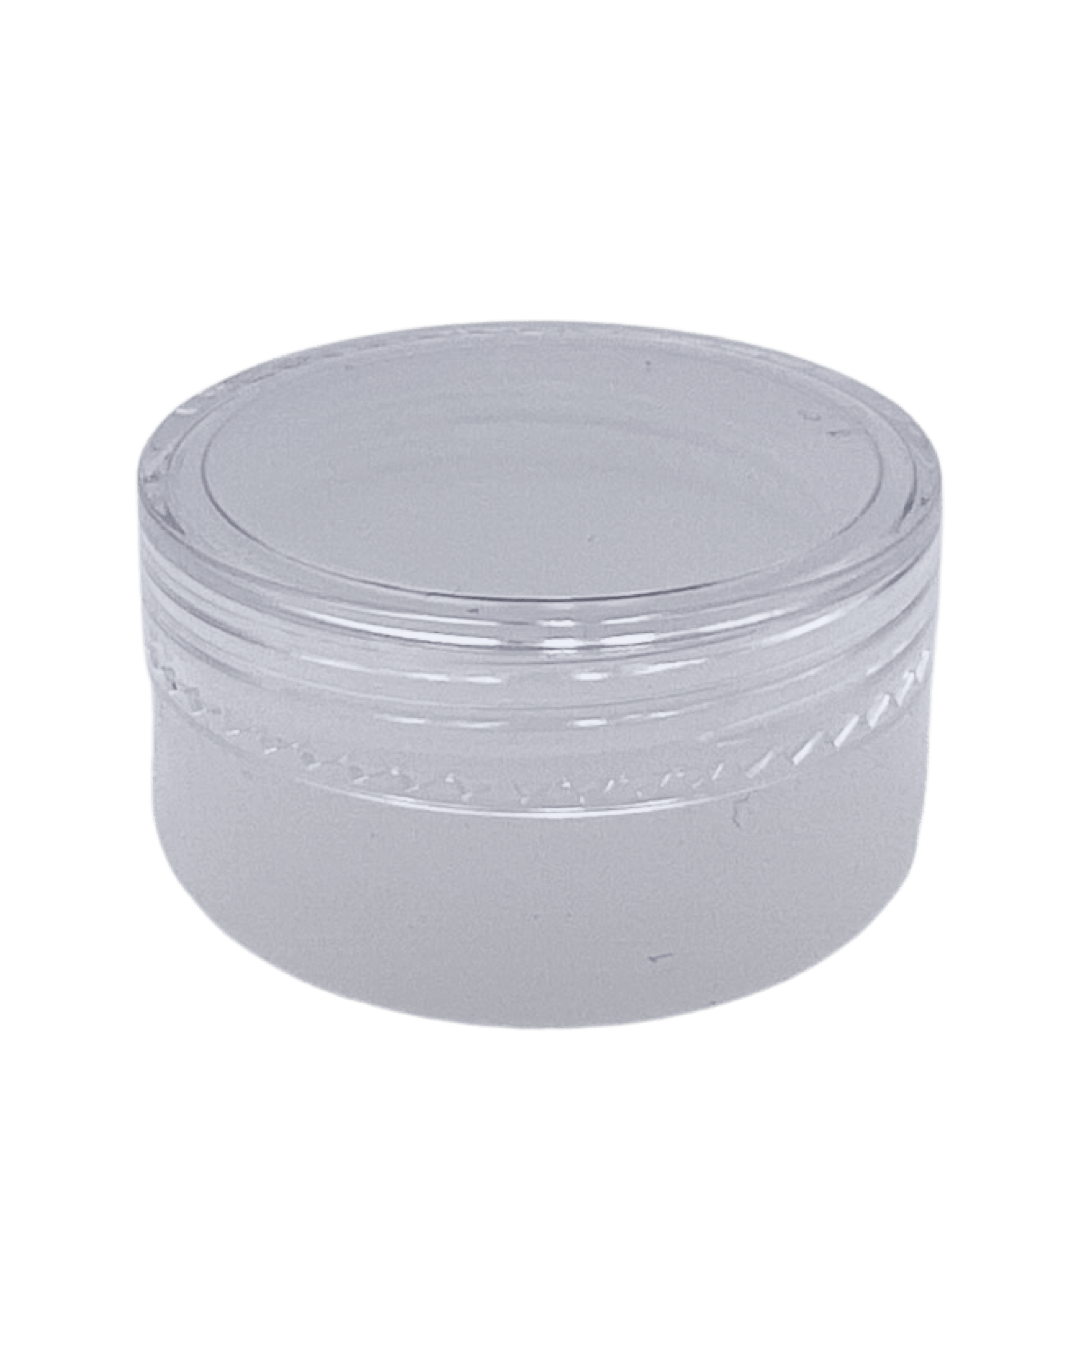 Silicone Concentrate Container (10 ml or 1.5 gram)